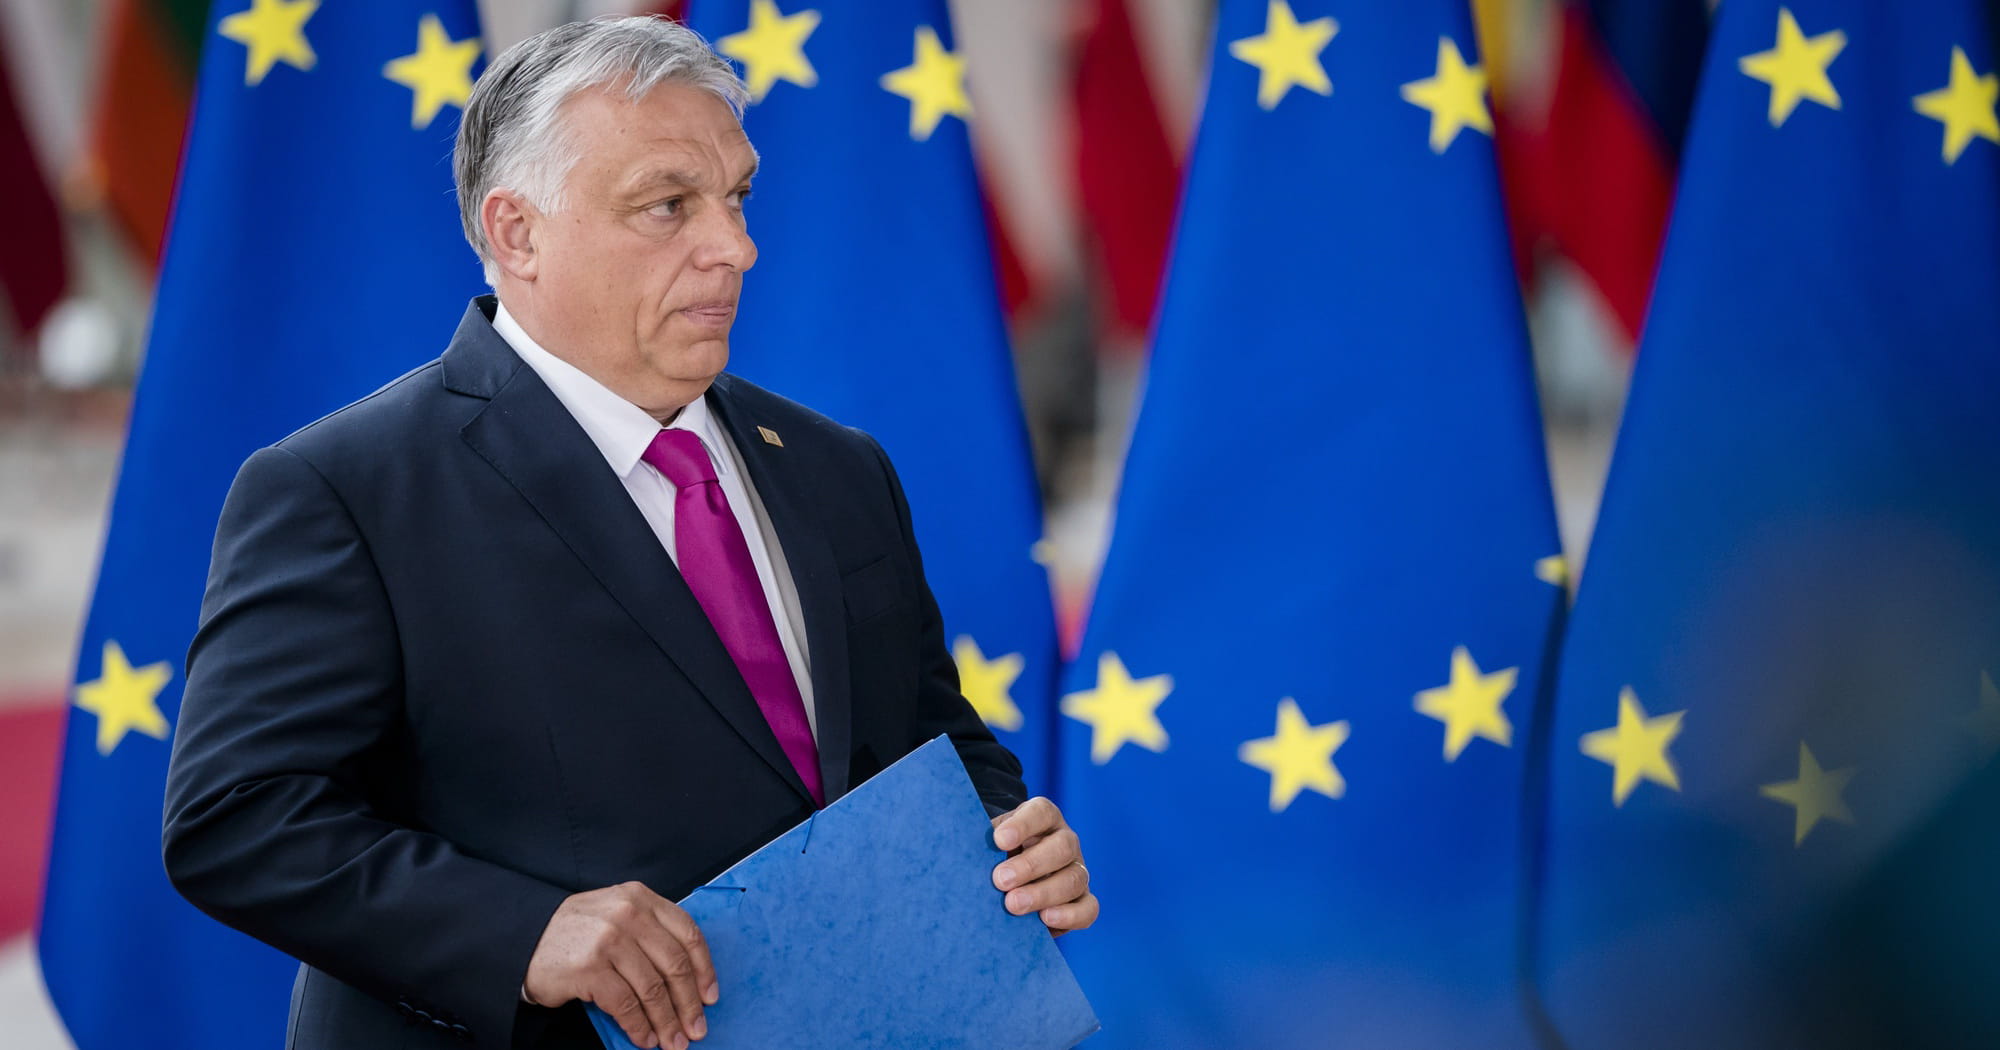 Five Reasons Why Hungary Supported Ukraine's EU Candidacy | European Pravda